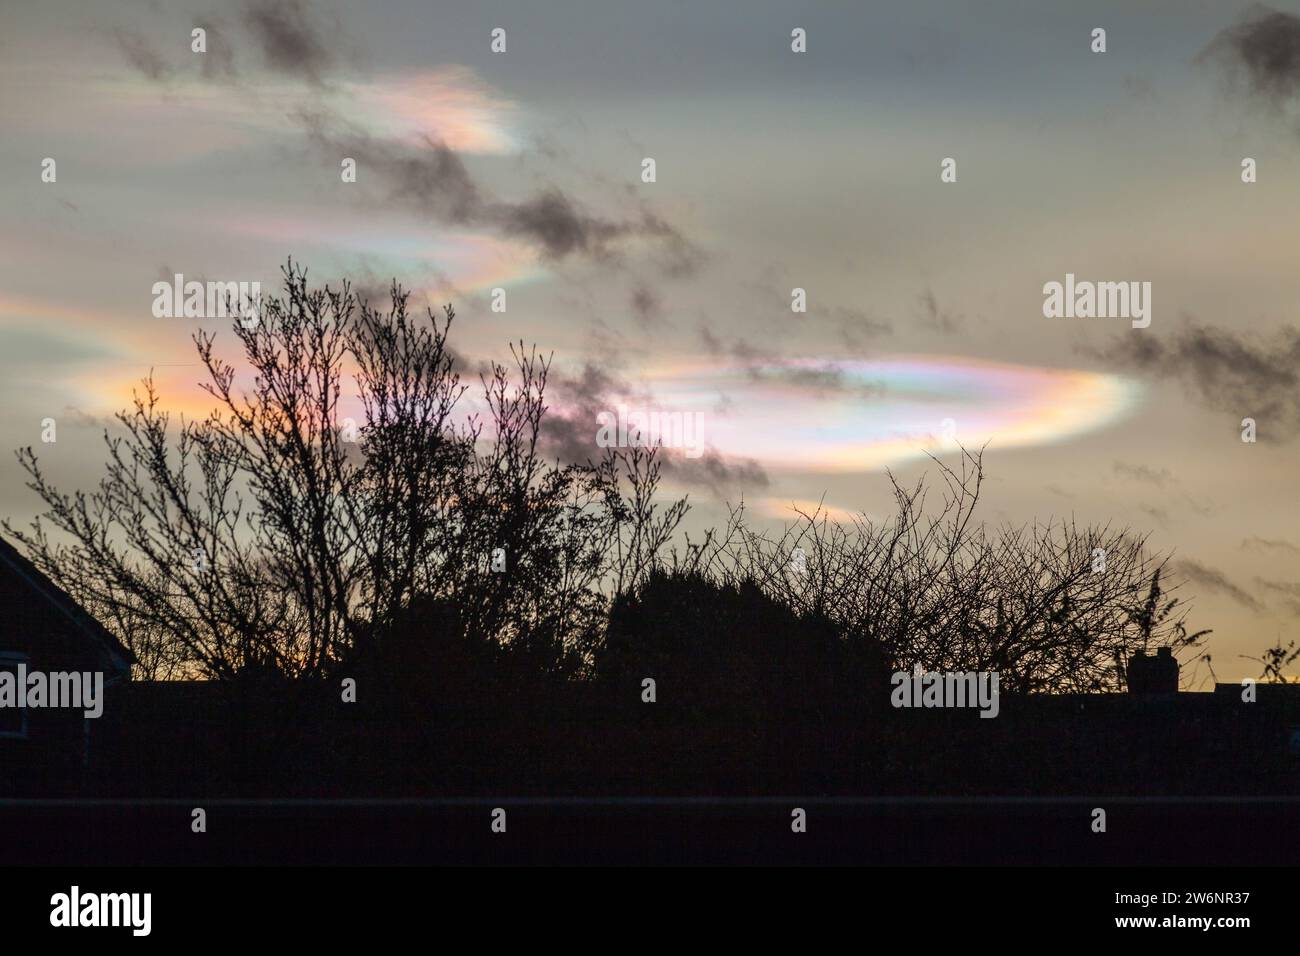 Stockton on Tees, UK. 21st December 2023.Rare 'mother of pearl” clouds in the sky over Fairfield. Also known as nacreous or polar stratospheric clouds. David Dixon / Alamy Stock Photo